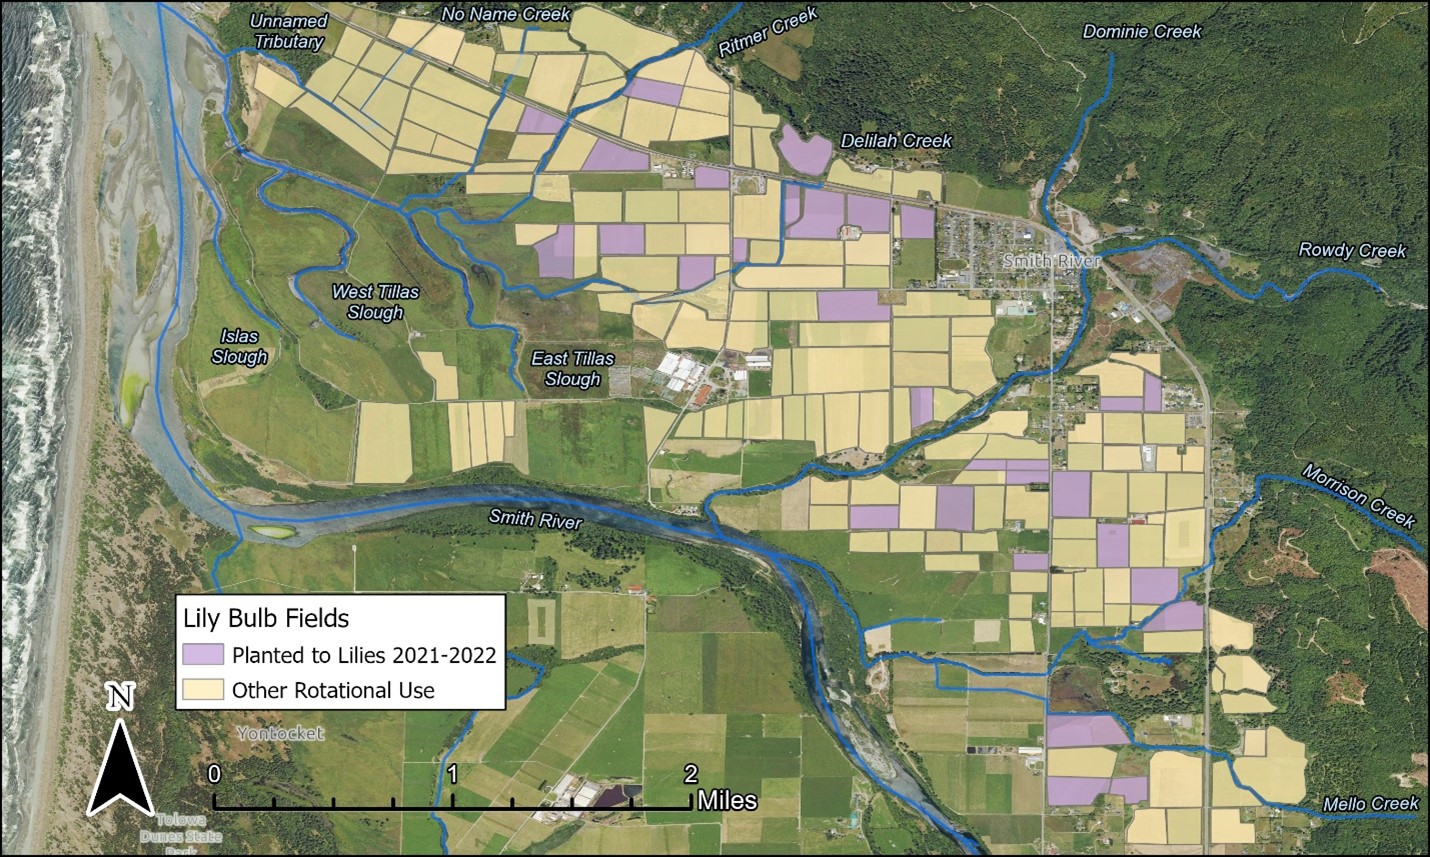 A map of the Smith River Plain showing about 30 agricultural fields that grew lily bulbs in 2021 through 2022. About 100 other fields that have previously grown lily bulbs are also shown. The map shows the Smith River through the middle, with the lily bulb fields to the north, above the river. Several creeks run through the lily bulb fields and meet the Smith River.